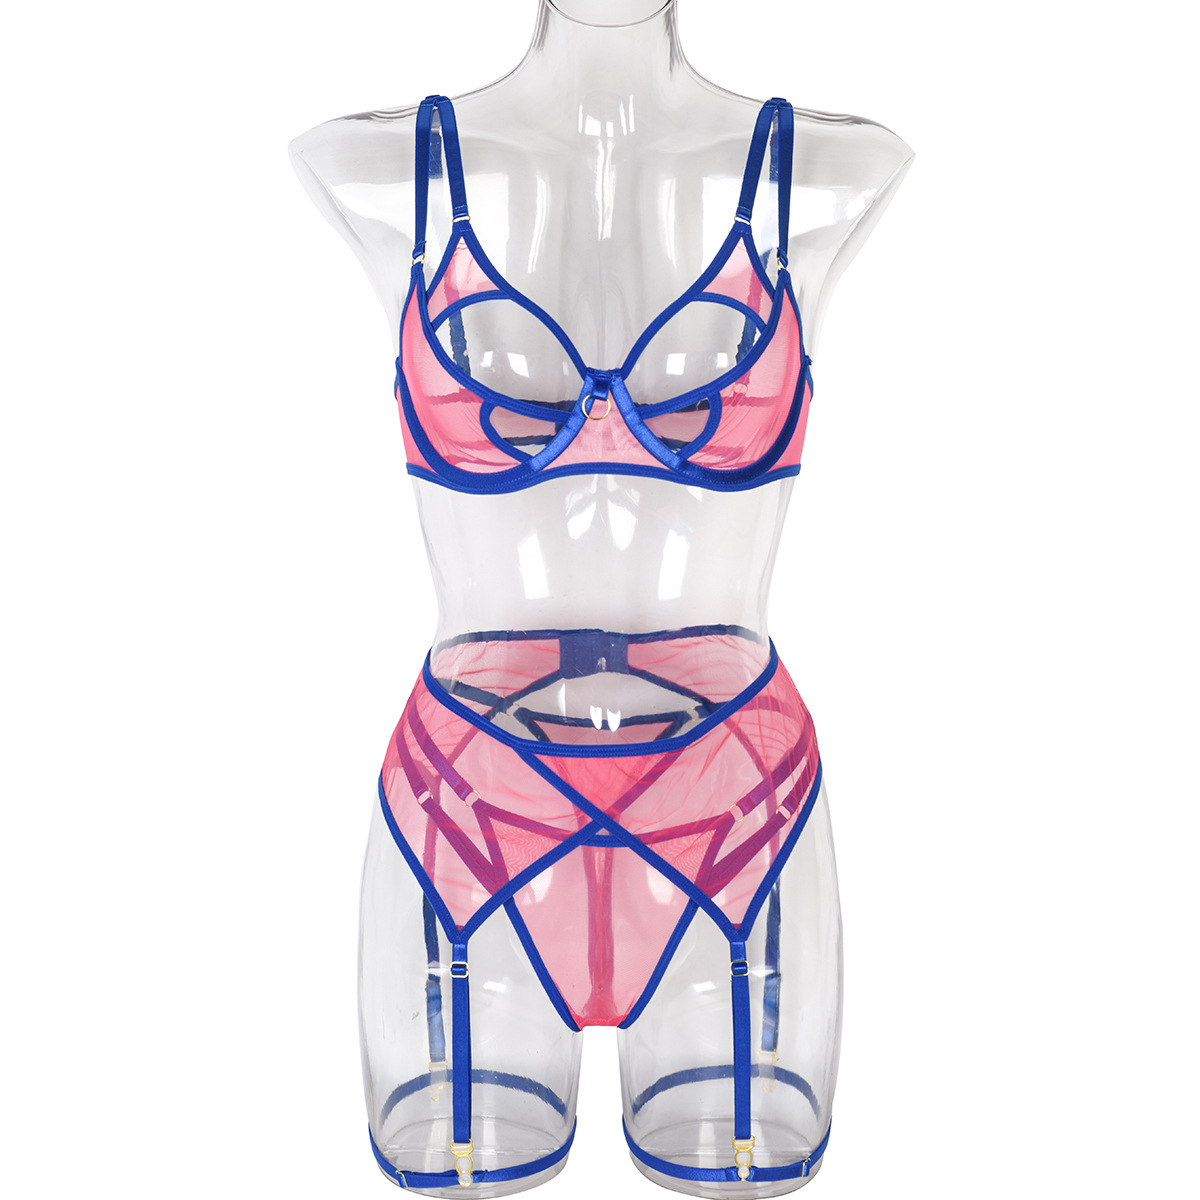 Red and Blue Color Butterfly Cut Three Piece Lingerie Set 